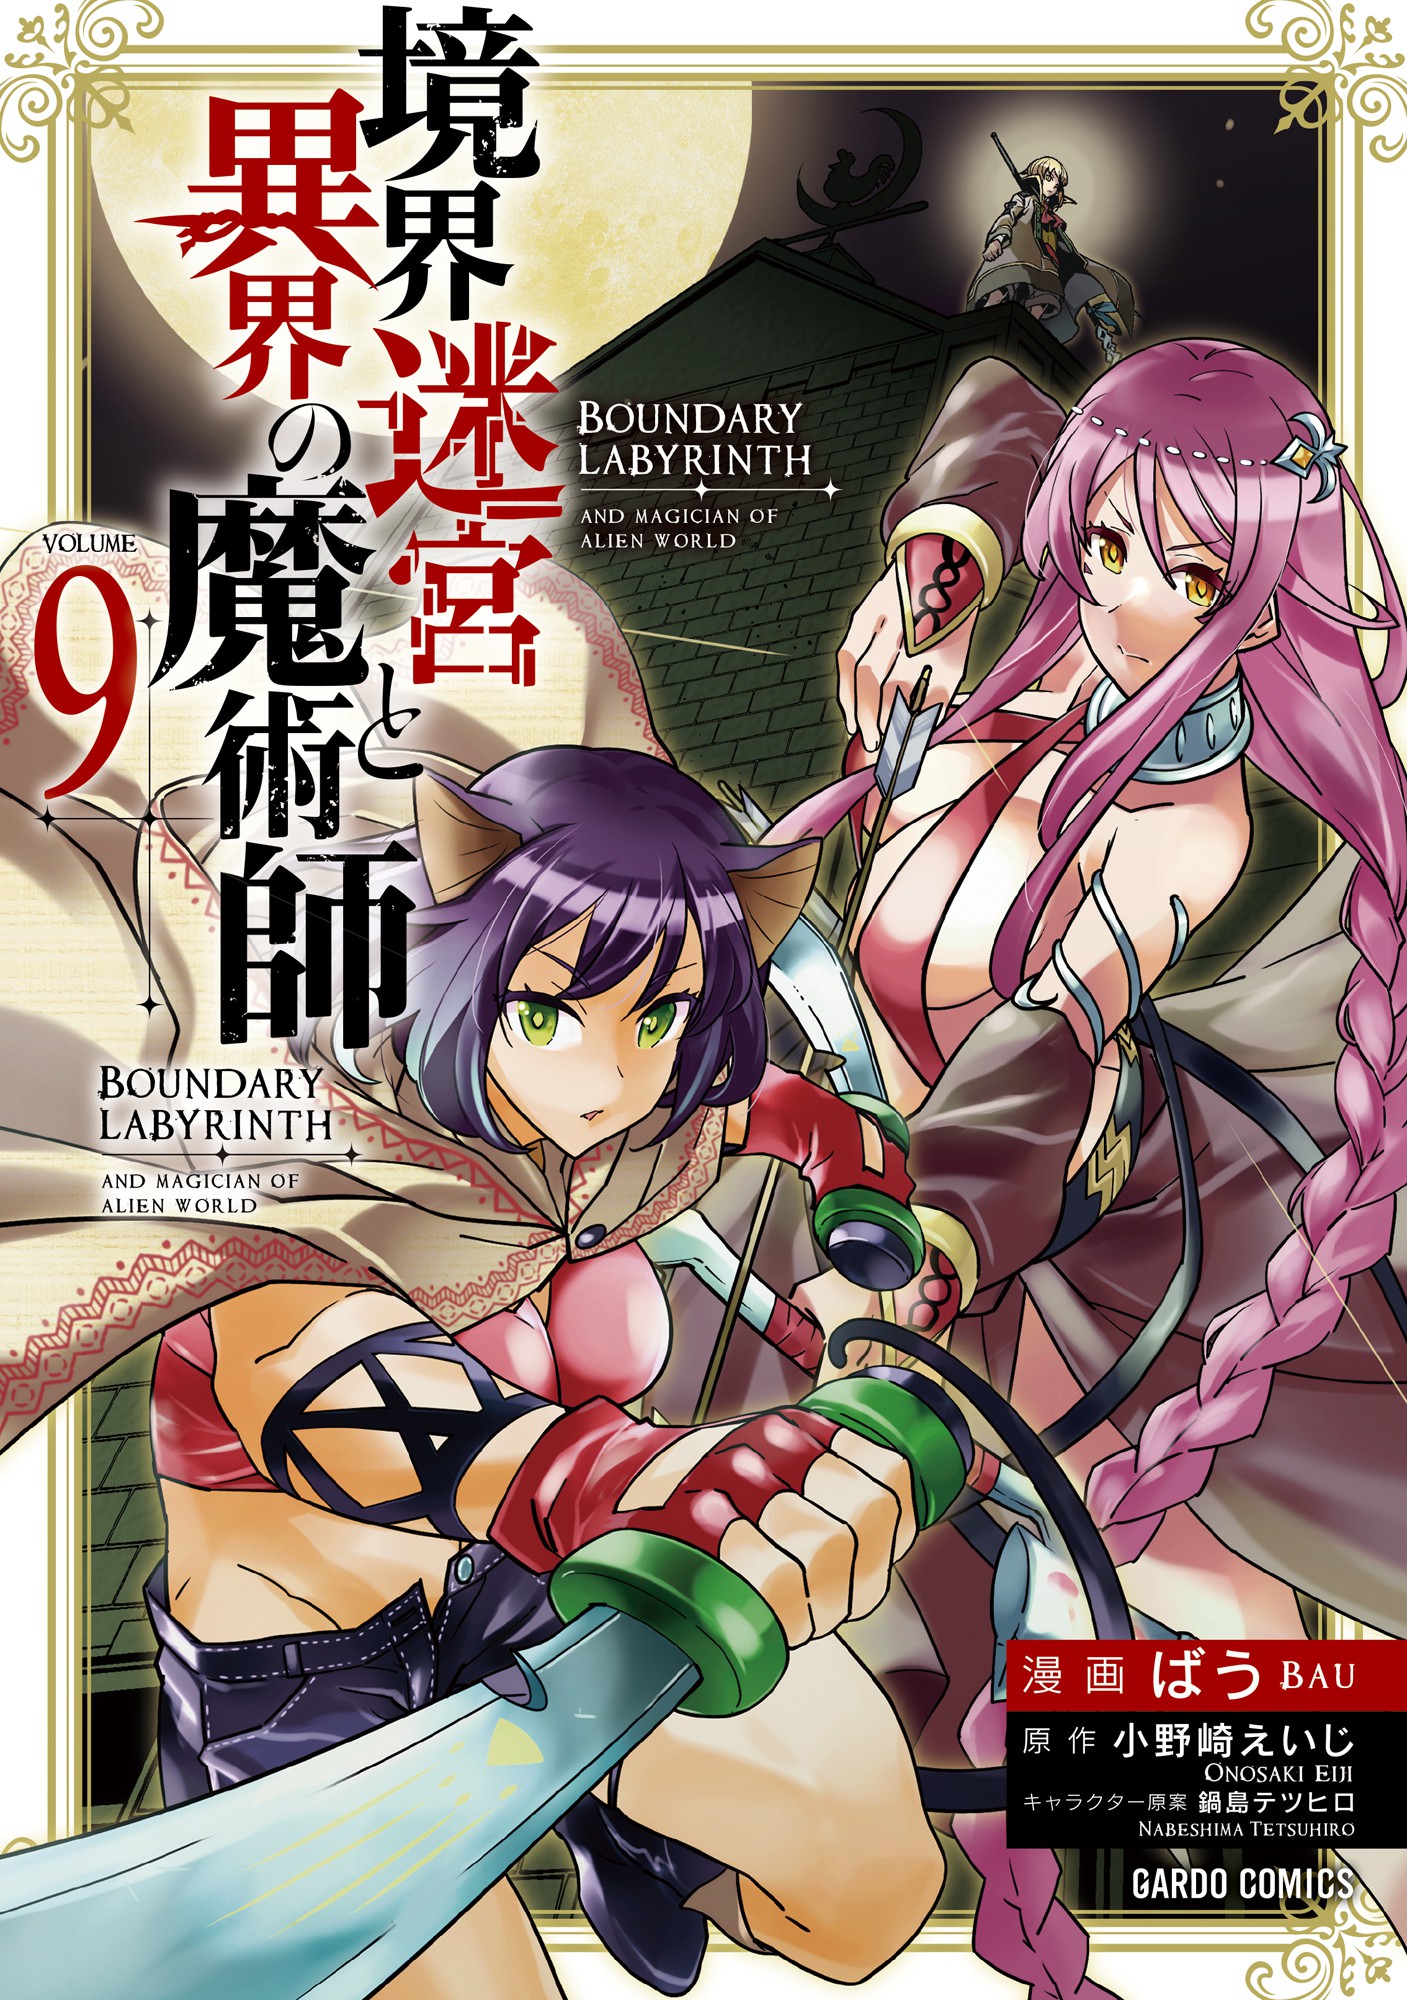 Harem in the Labyrinth of Another World capitulo 1 en espanol